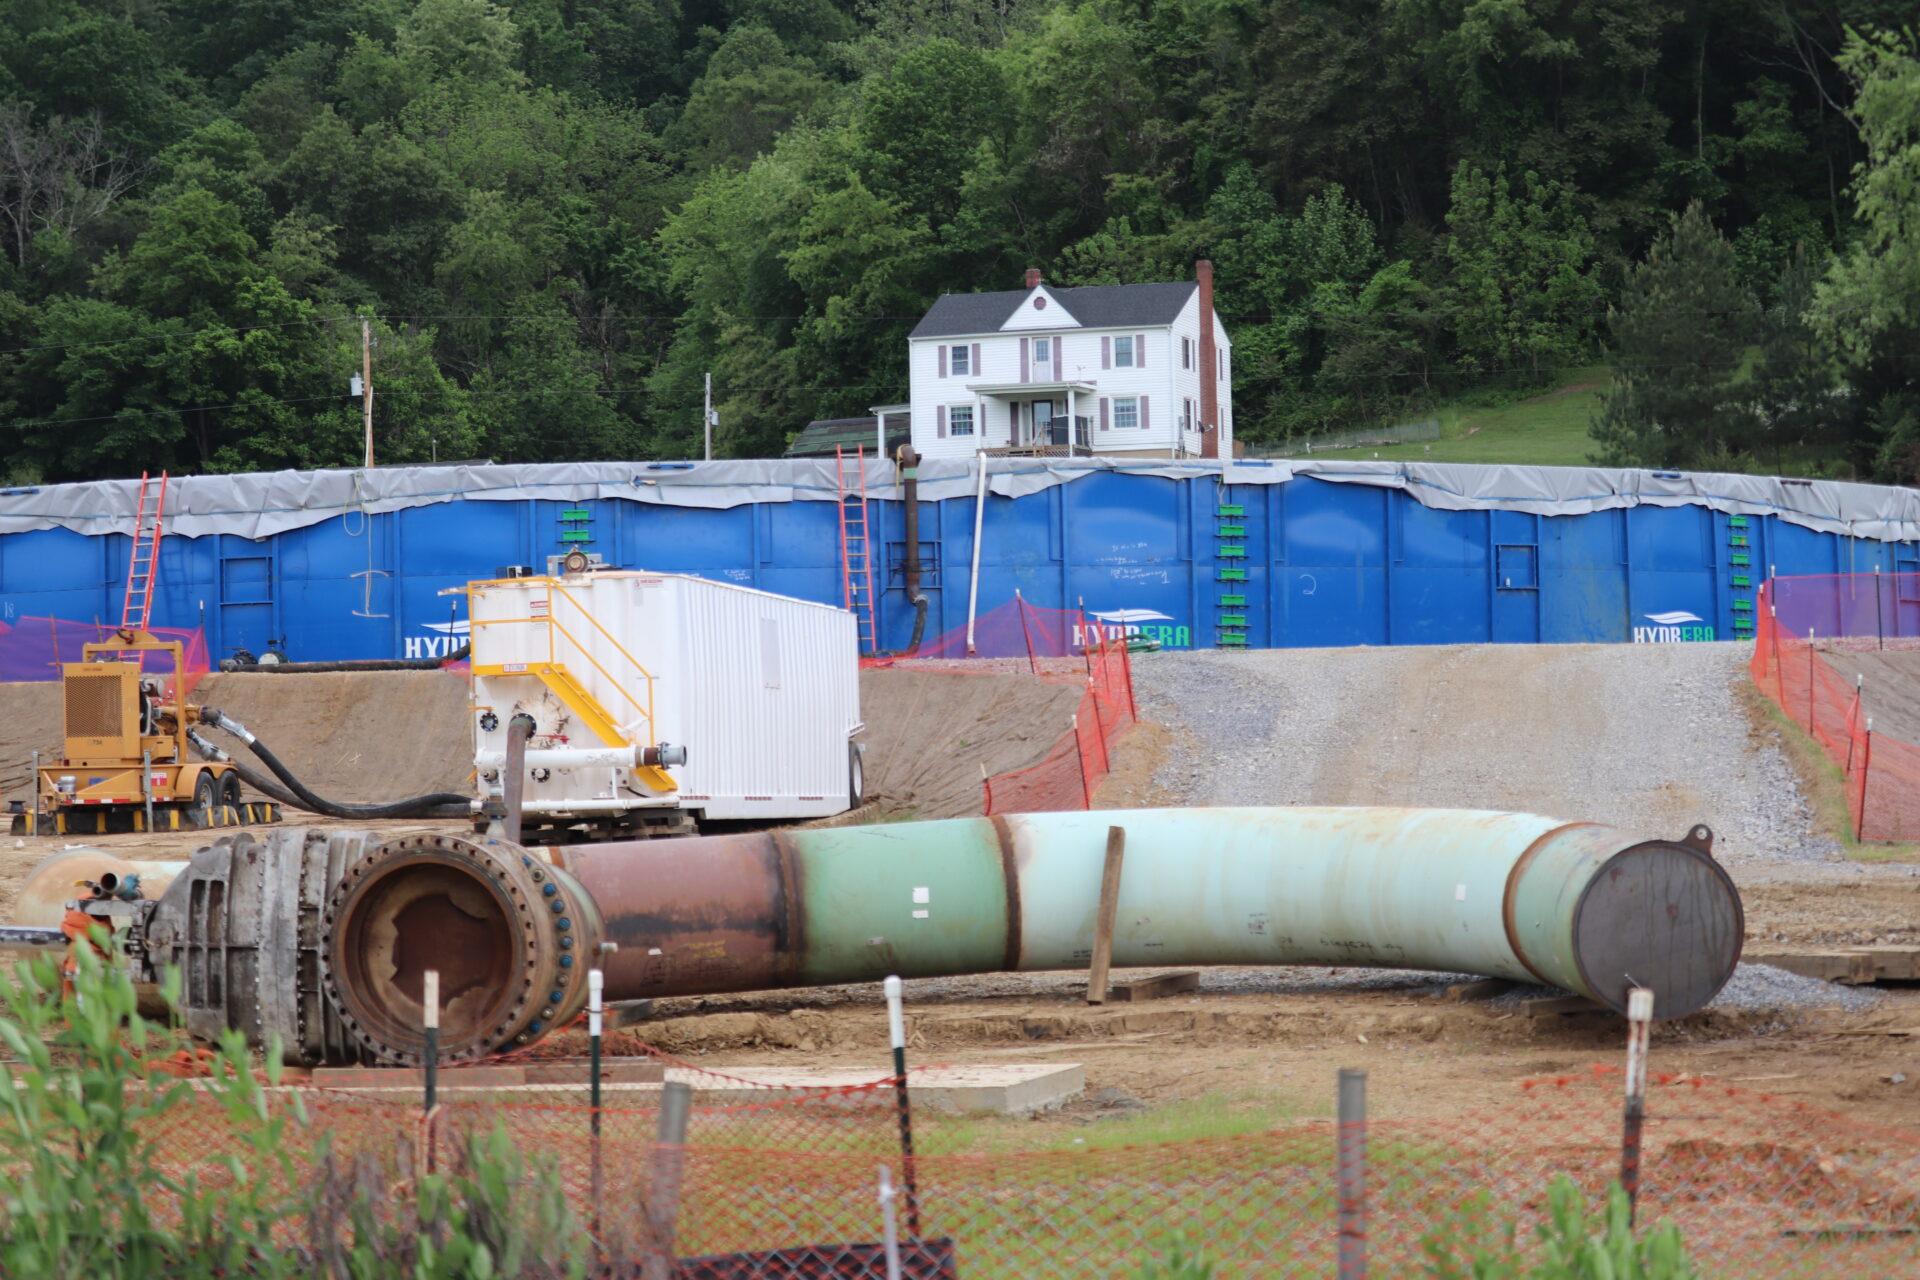 A large section of green pipe lies on the ground in front of a large blue water storage tank and a residence.